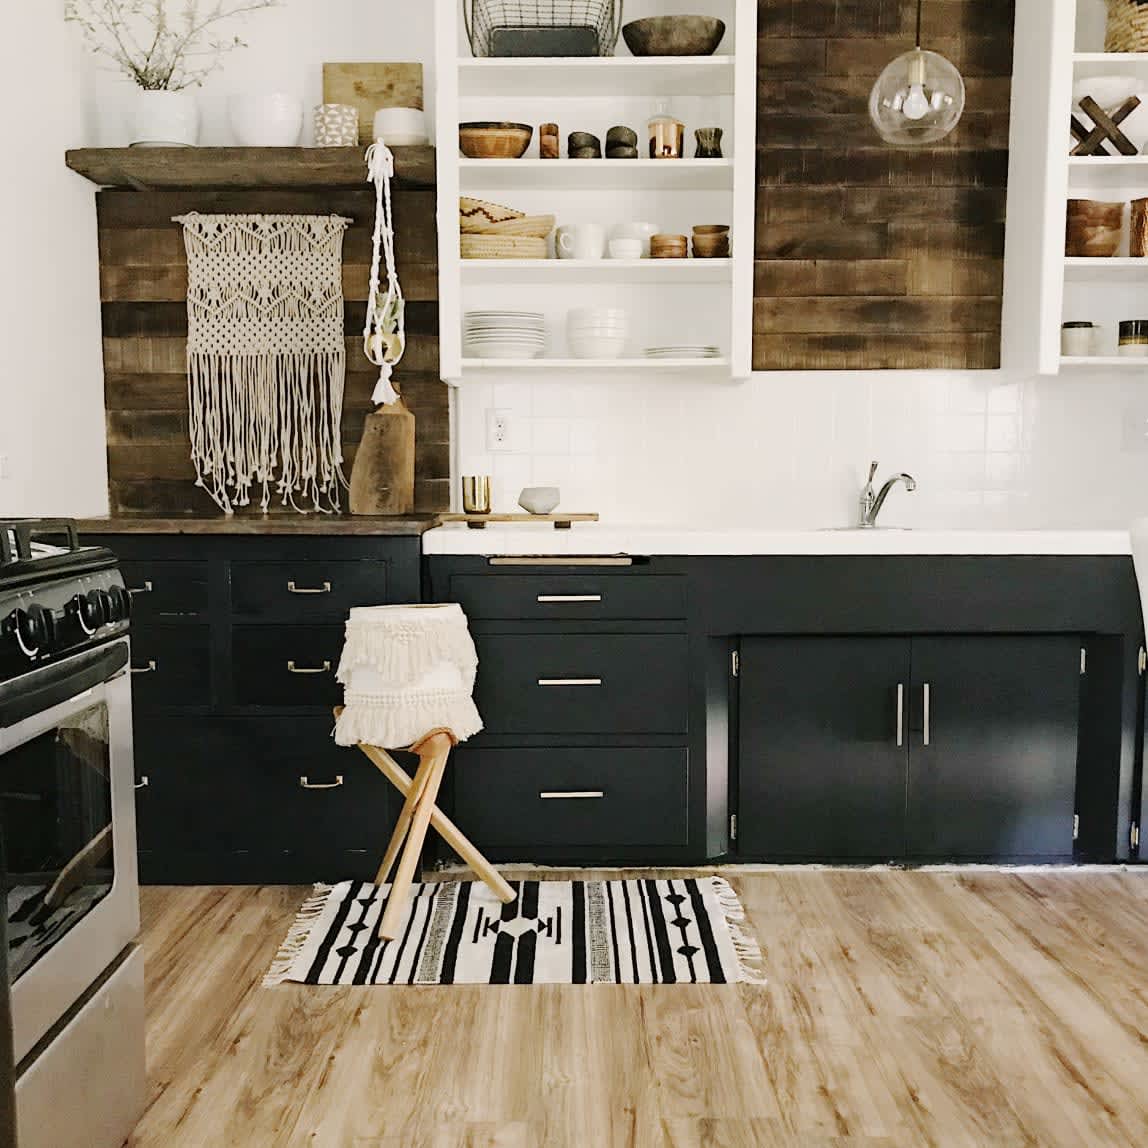 https://cdn.apartmenttherapy.info/image/upload/v1694405923/at/SEO%20Updates/black%20and%20white%20kitchens/black-and-white-kitchen-reclaimed-wood.jpg